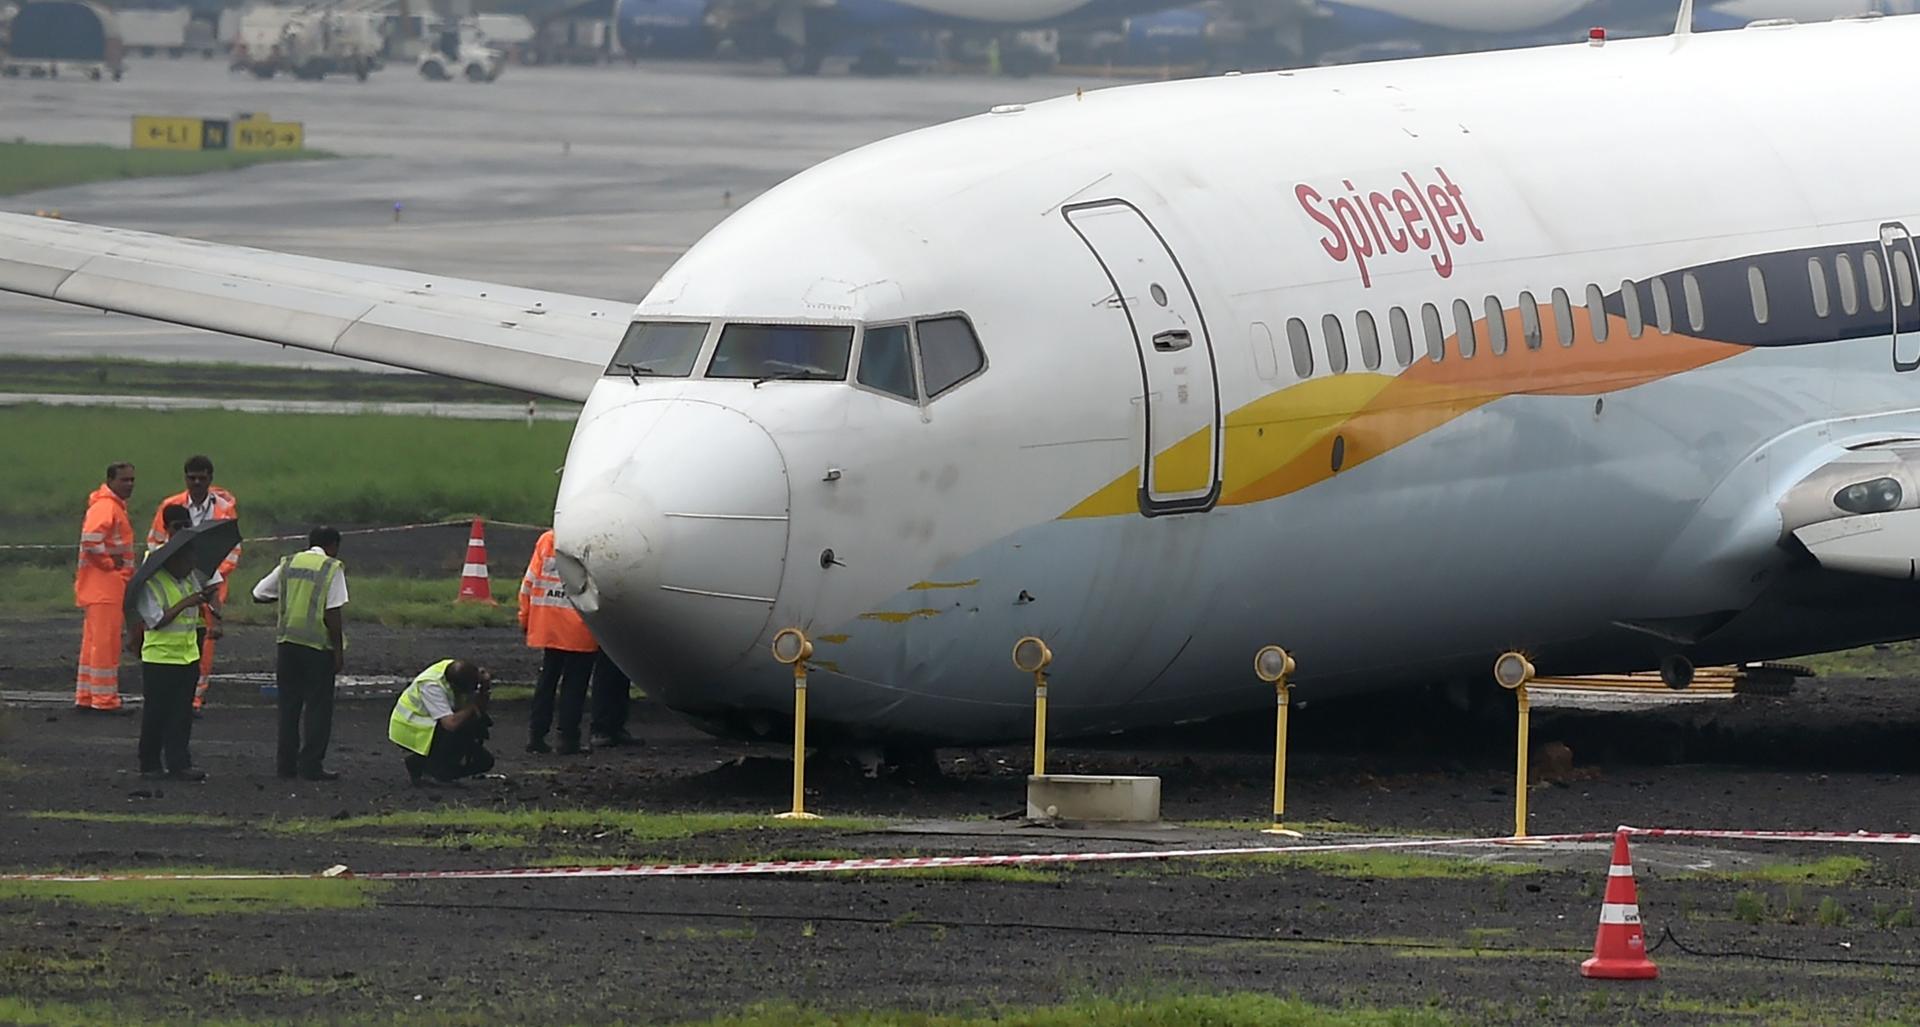 TOPSHOT - A SpiceJet aircraft is surrounded by airport staff as it stands stranded off the tarmac at Chhatrapati Shivaji Maharaj International Airport in Mumbai on July 2, 2019, after it overran the runway while landing during heavy rain, causing no injuries. / AFP / PUNIT PARANJPE
